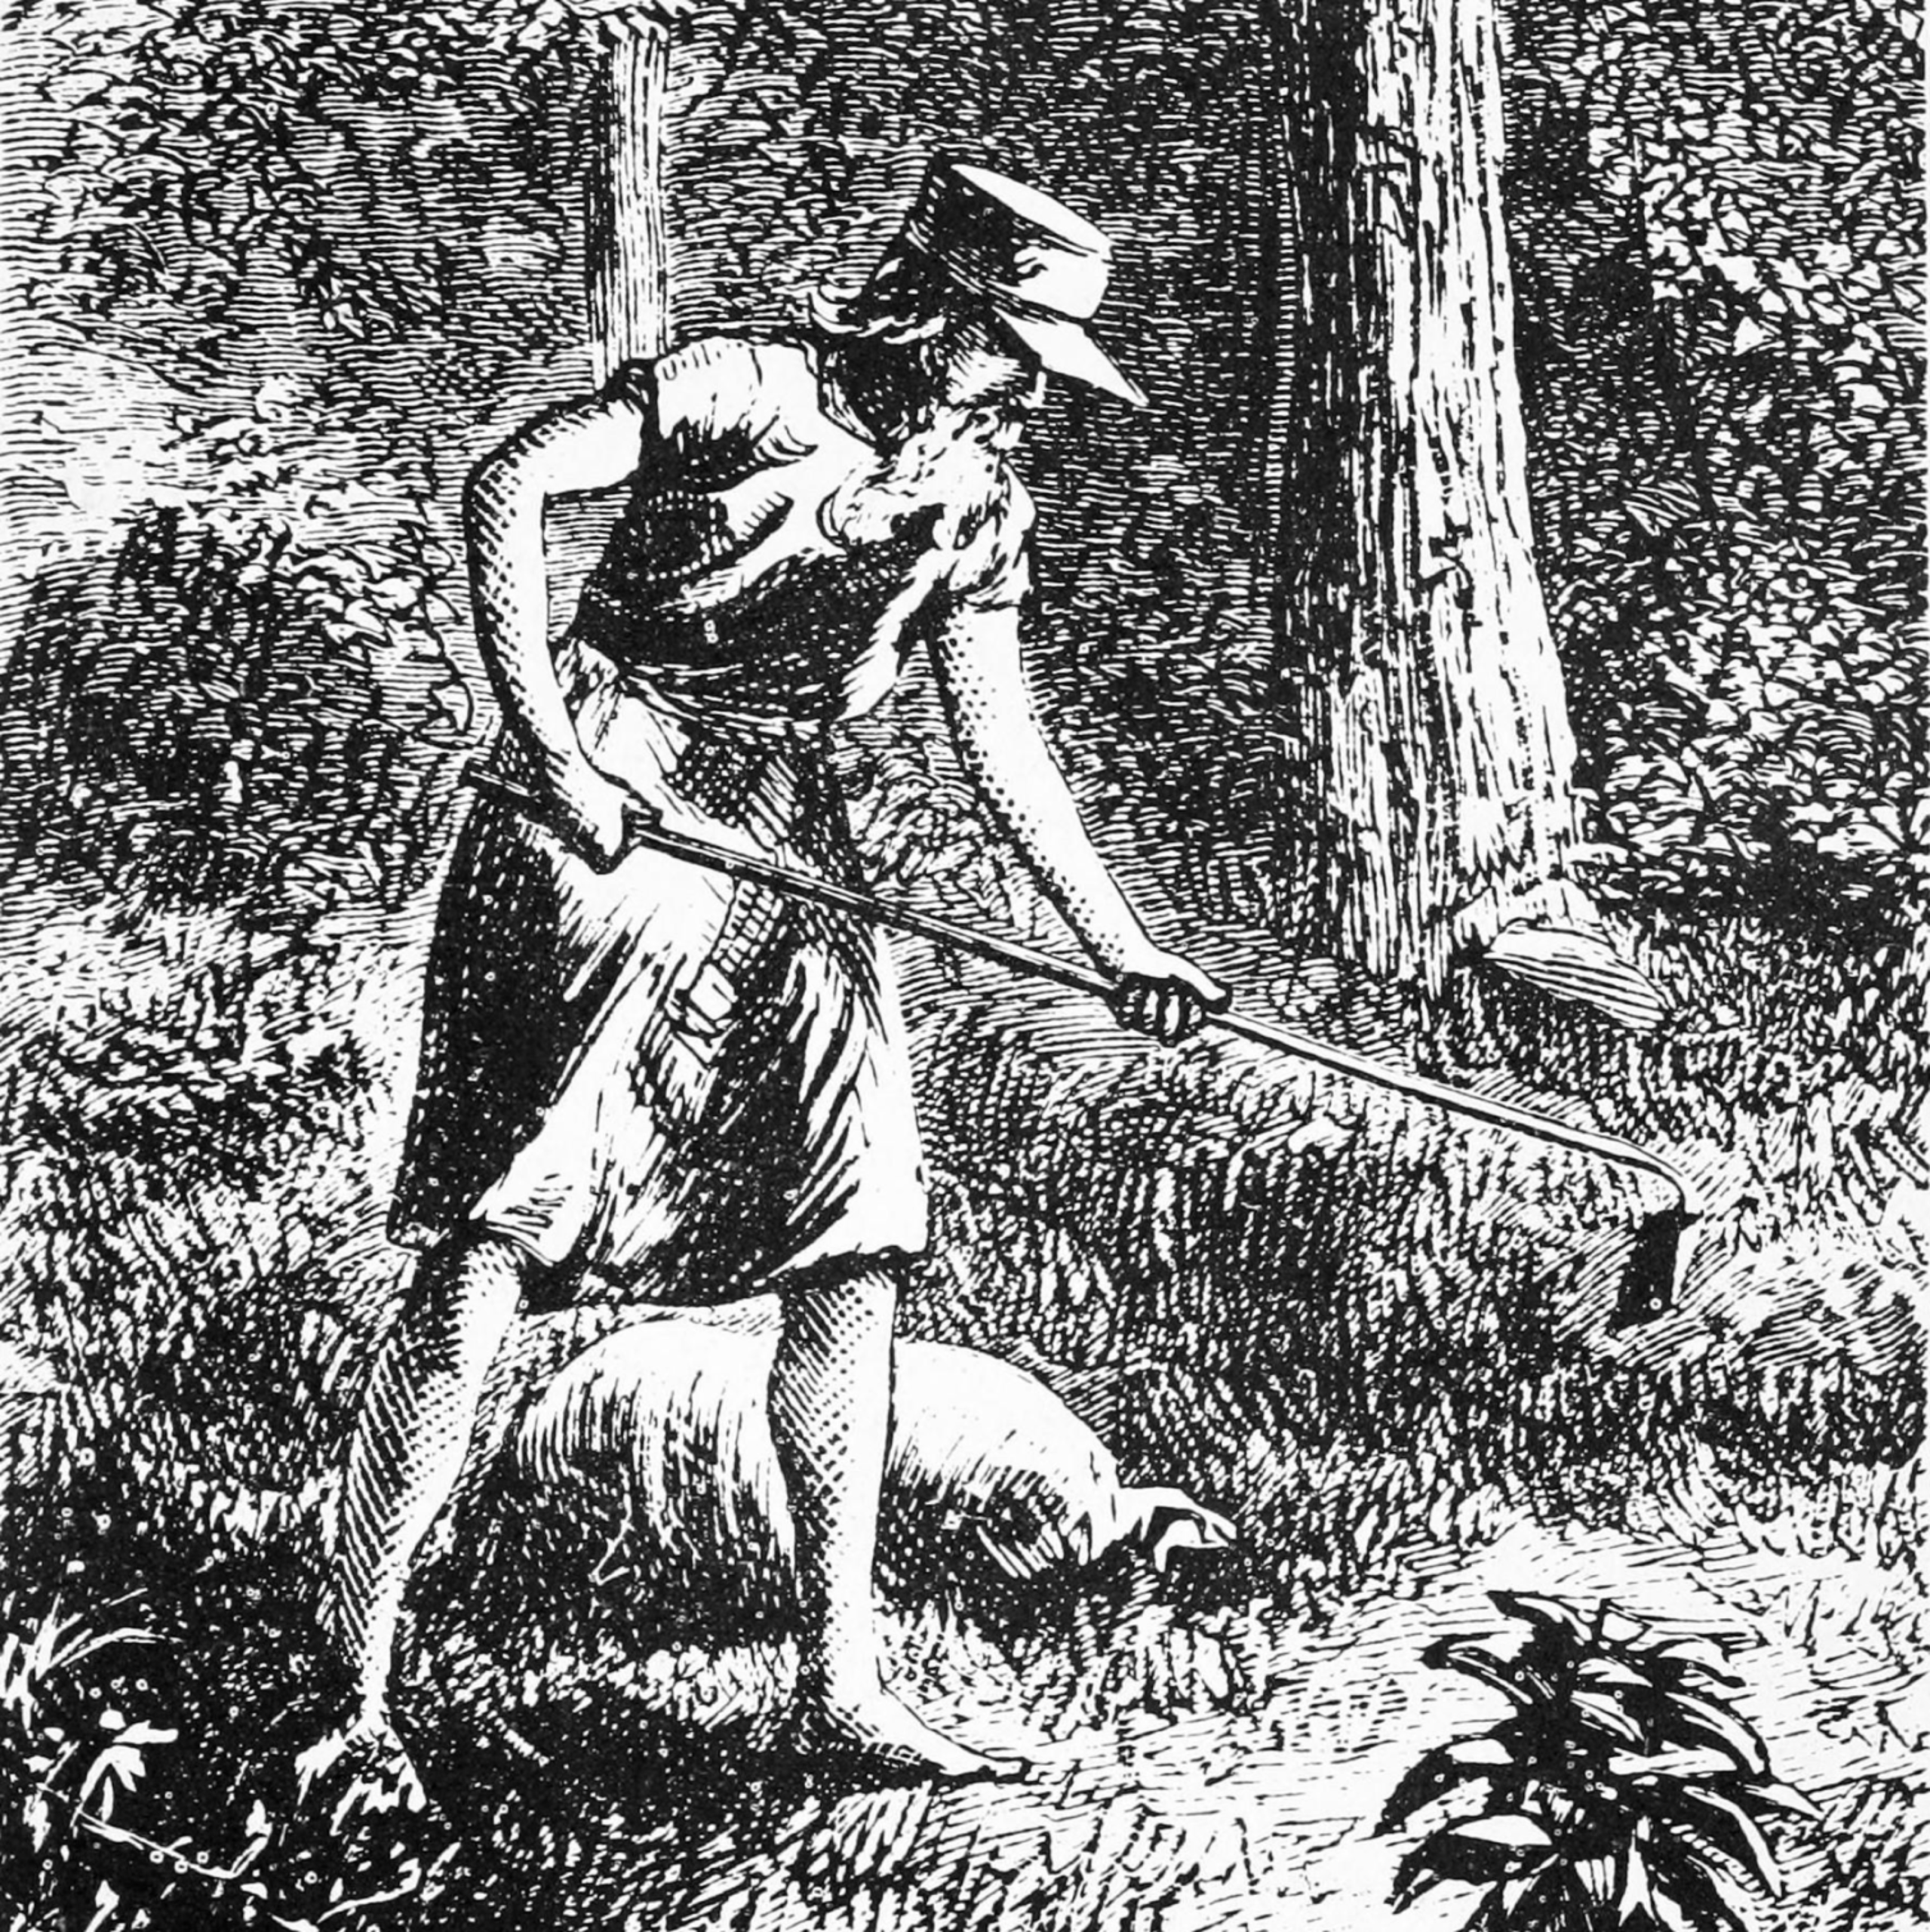 Johnny Appleseed; Unknown author, Public domain, via Wikimedia Commons; 1871; An etching of John Chapman, aka Johnny Appleseed, from Harper's New Monthly Magazine in 1871. According to Pollan in The Botany of Desire, the engraving depicts him "as a sinewy, barefoot figure with a goatish beard," wearing "something that looks . . . like a toga or a dress."